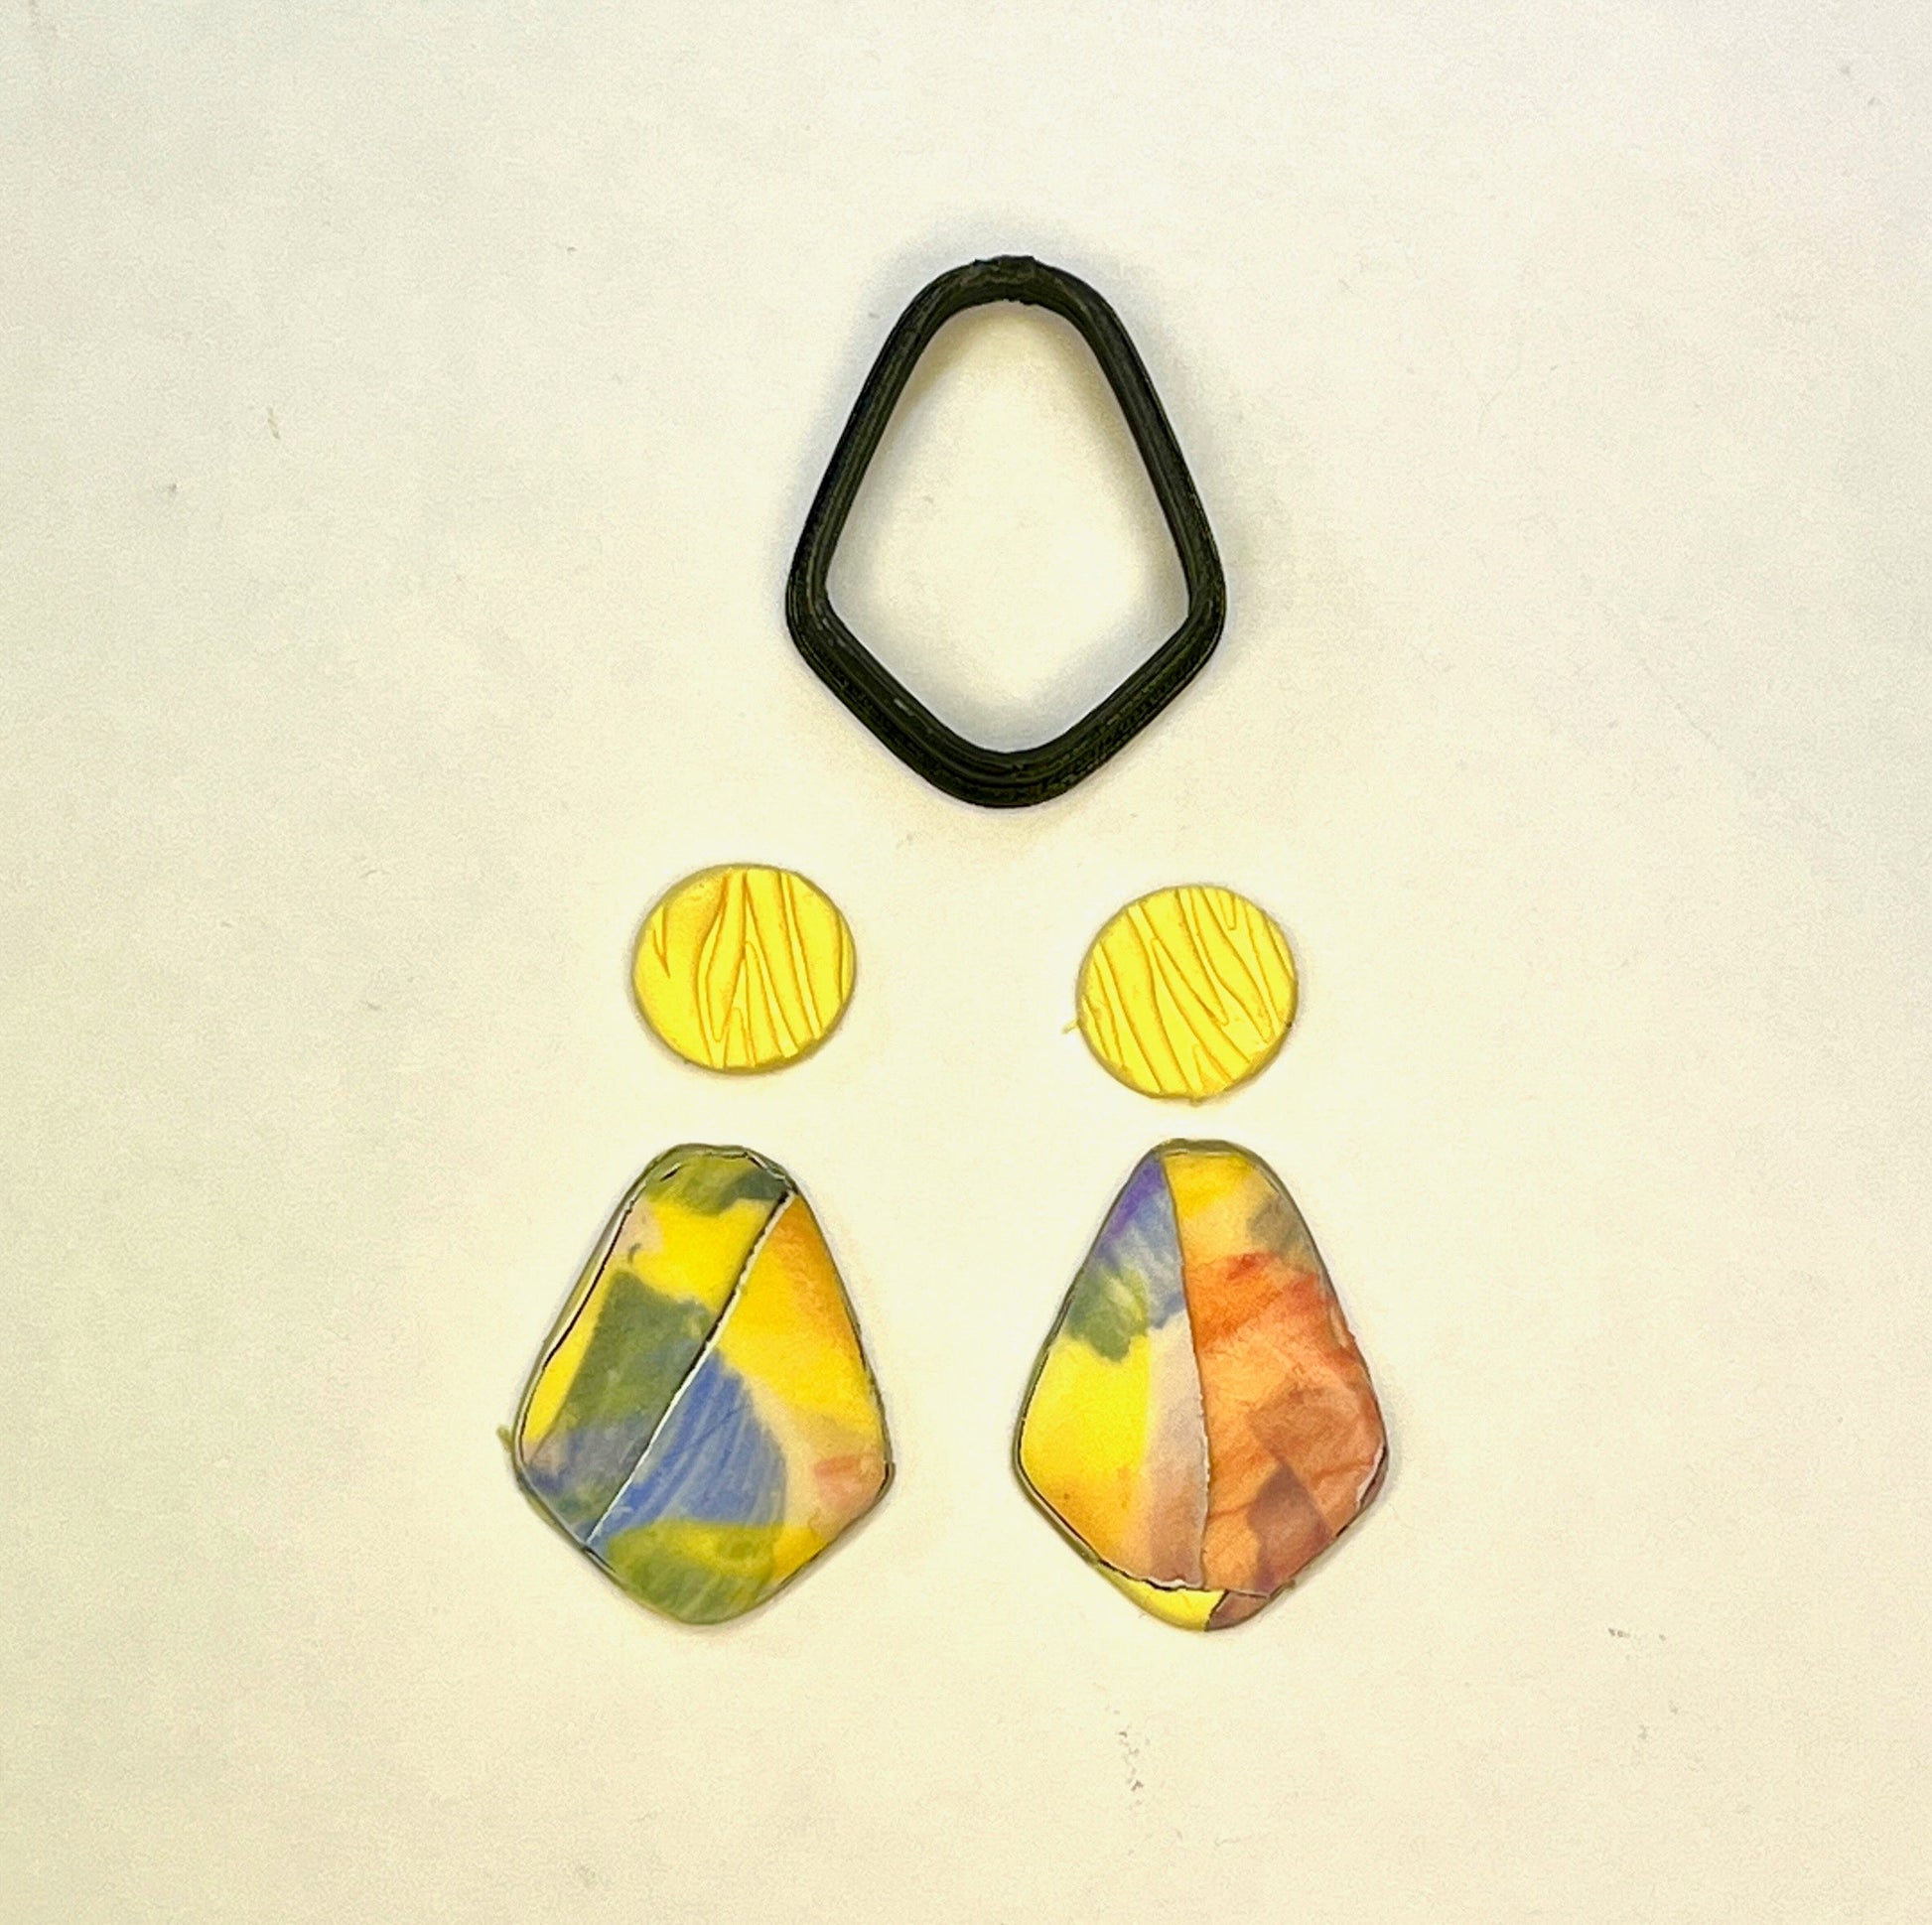 cutter shape and examples of earring using this shape